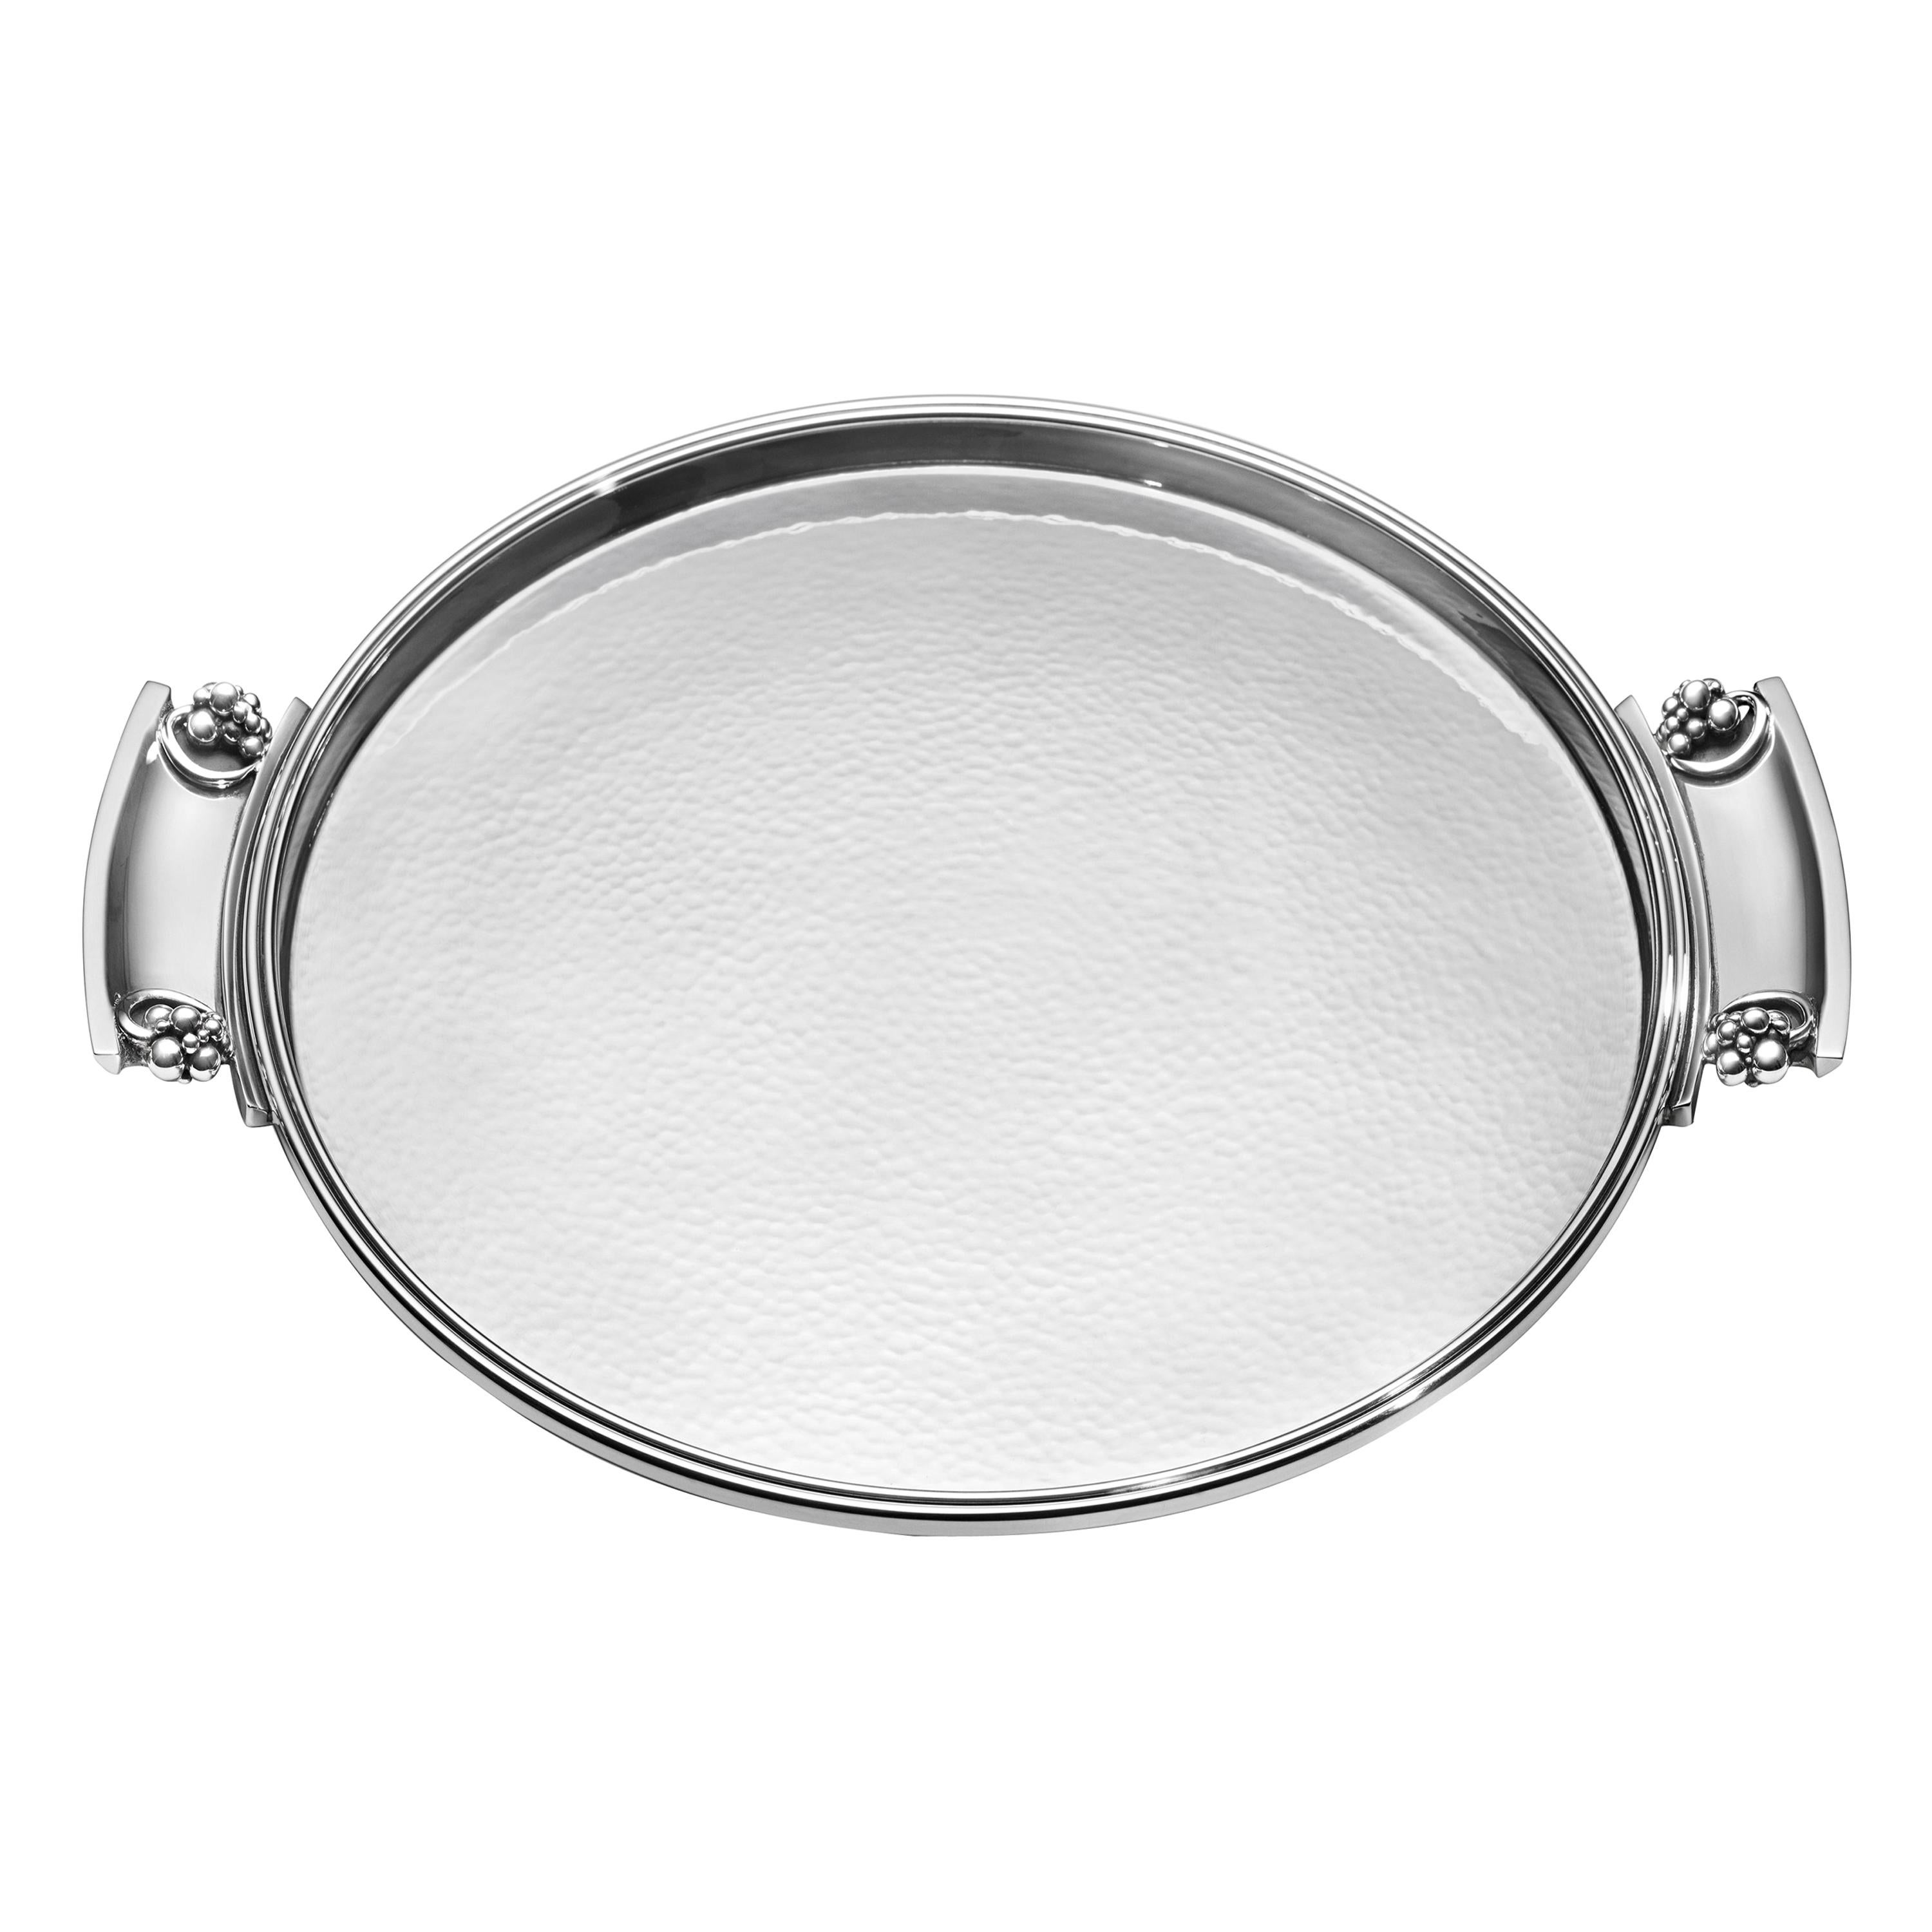 Georg Jensen 296 Handcrafted Sterling Silver Tray